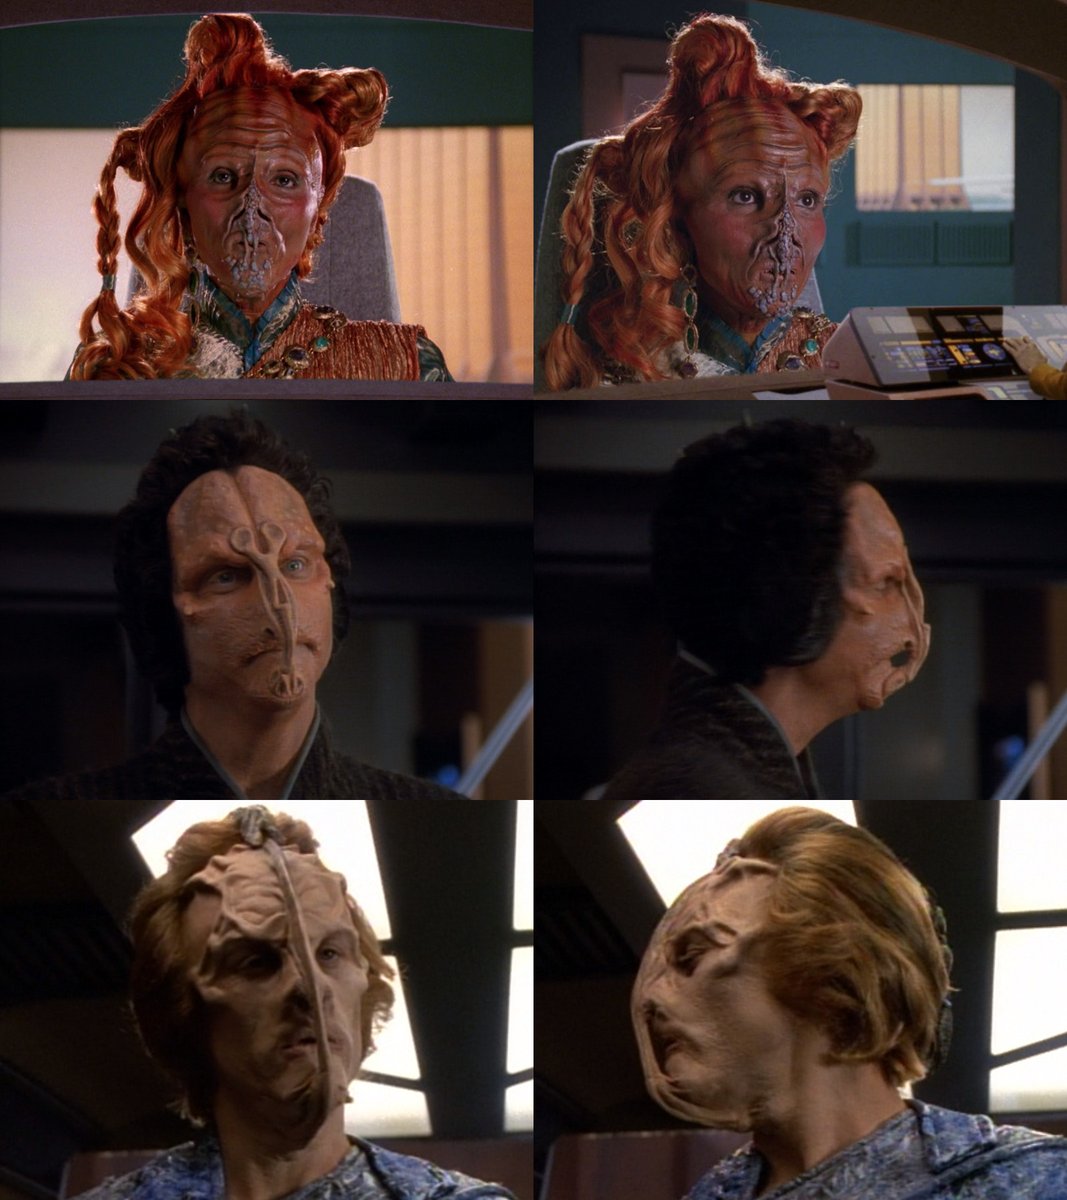 So far, at least 3 species have been seen with 'stuff' in front of their mouths that could make eating difficult (if they use their mouth for that...):
Sonji of Gamelan V in #StarTrekTNG's 'Final Mission'
Fallit Kot in #StarTrekDS9's 'Melora'
Tak Tak in #StarTrekVOY's 'Macrocosm'